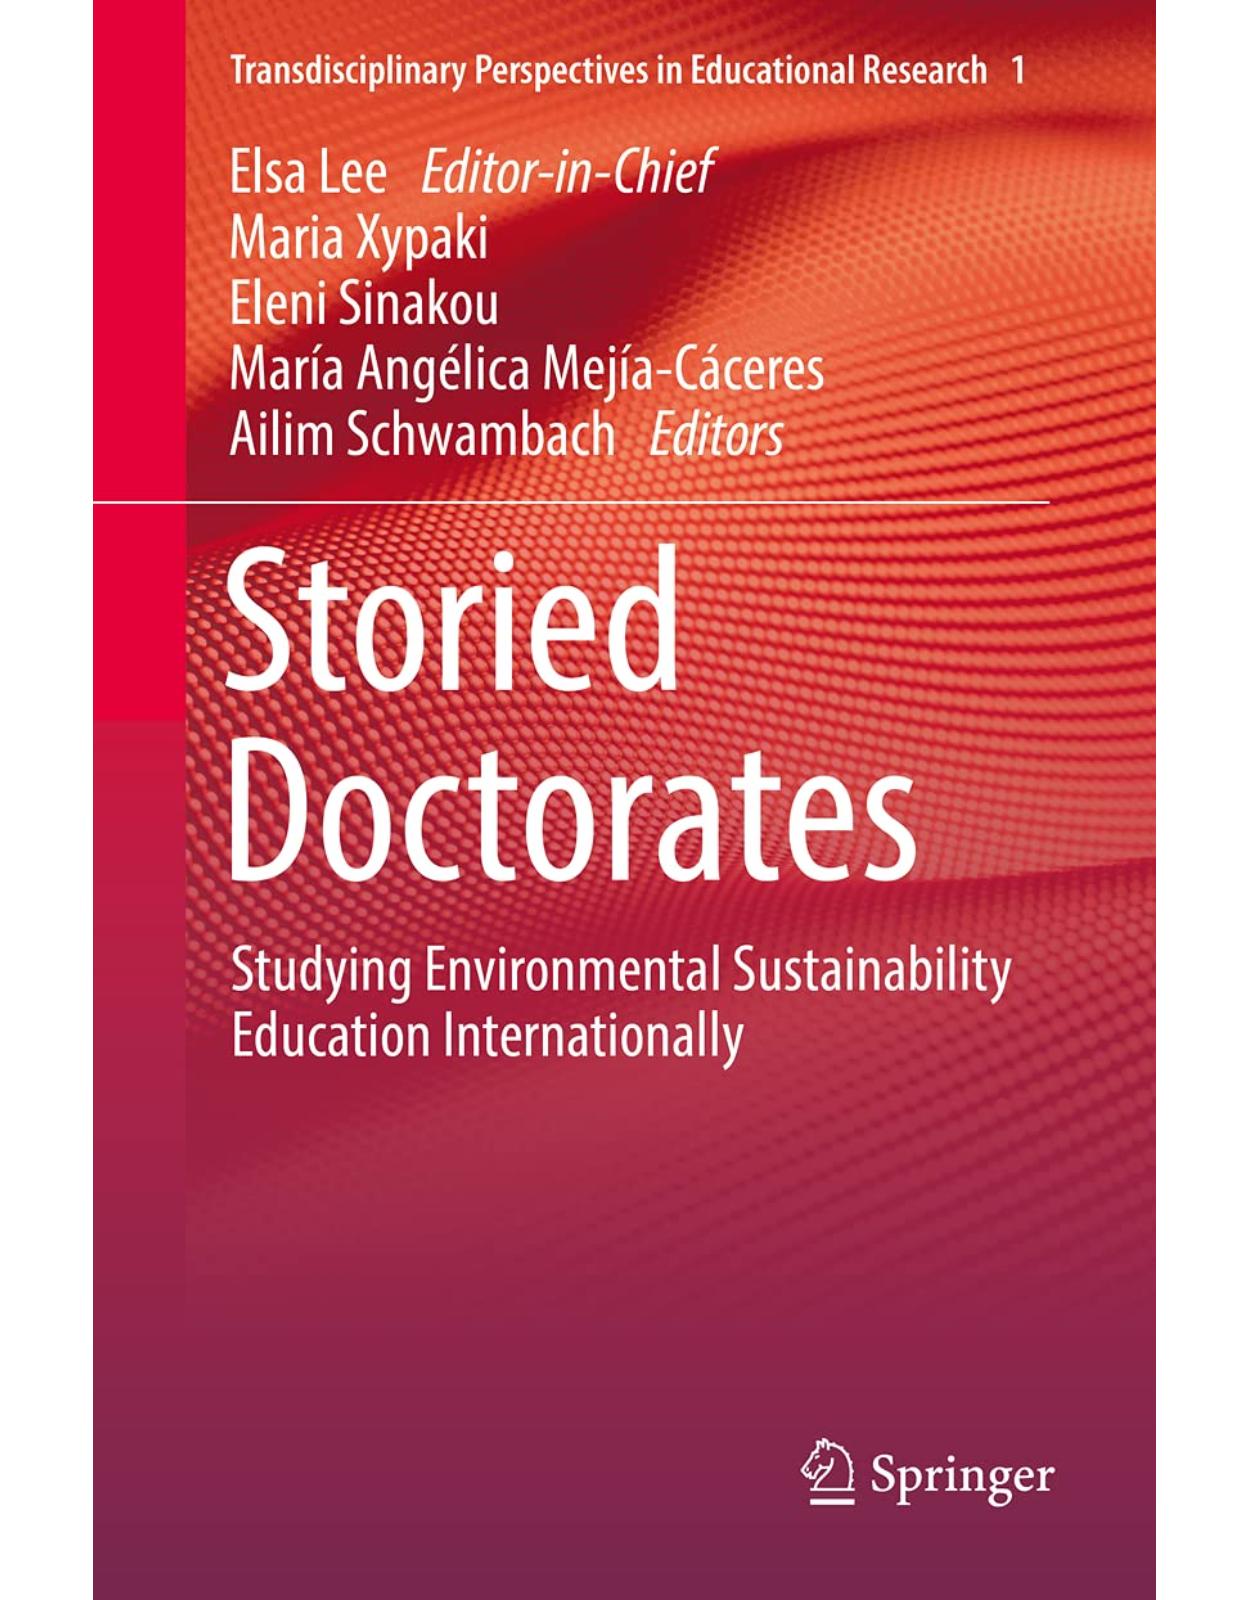 Storied Doctorates: Studying Environmental Sustainability Education Internationally: 1 (Transdisciplinary Perspectives in Educational Research, 1)